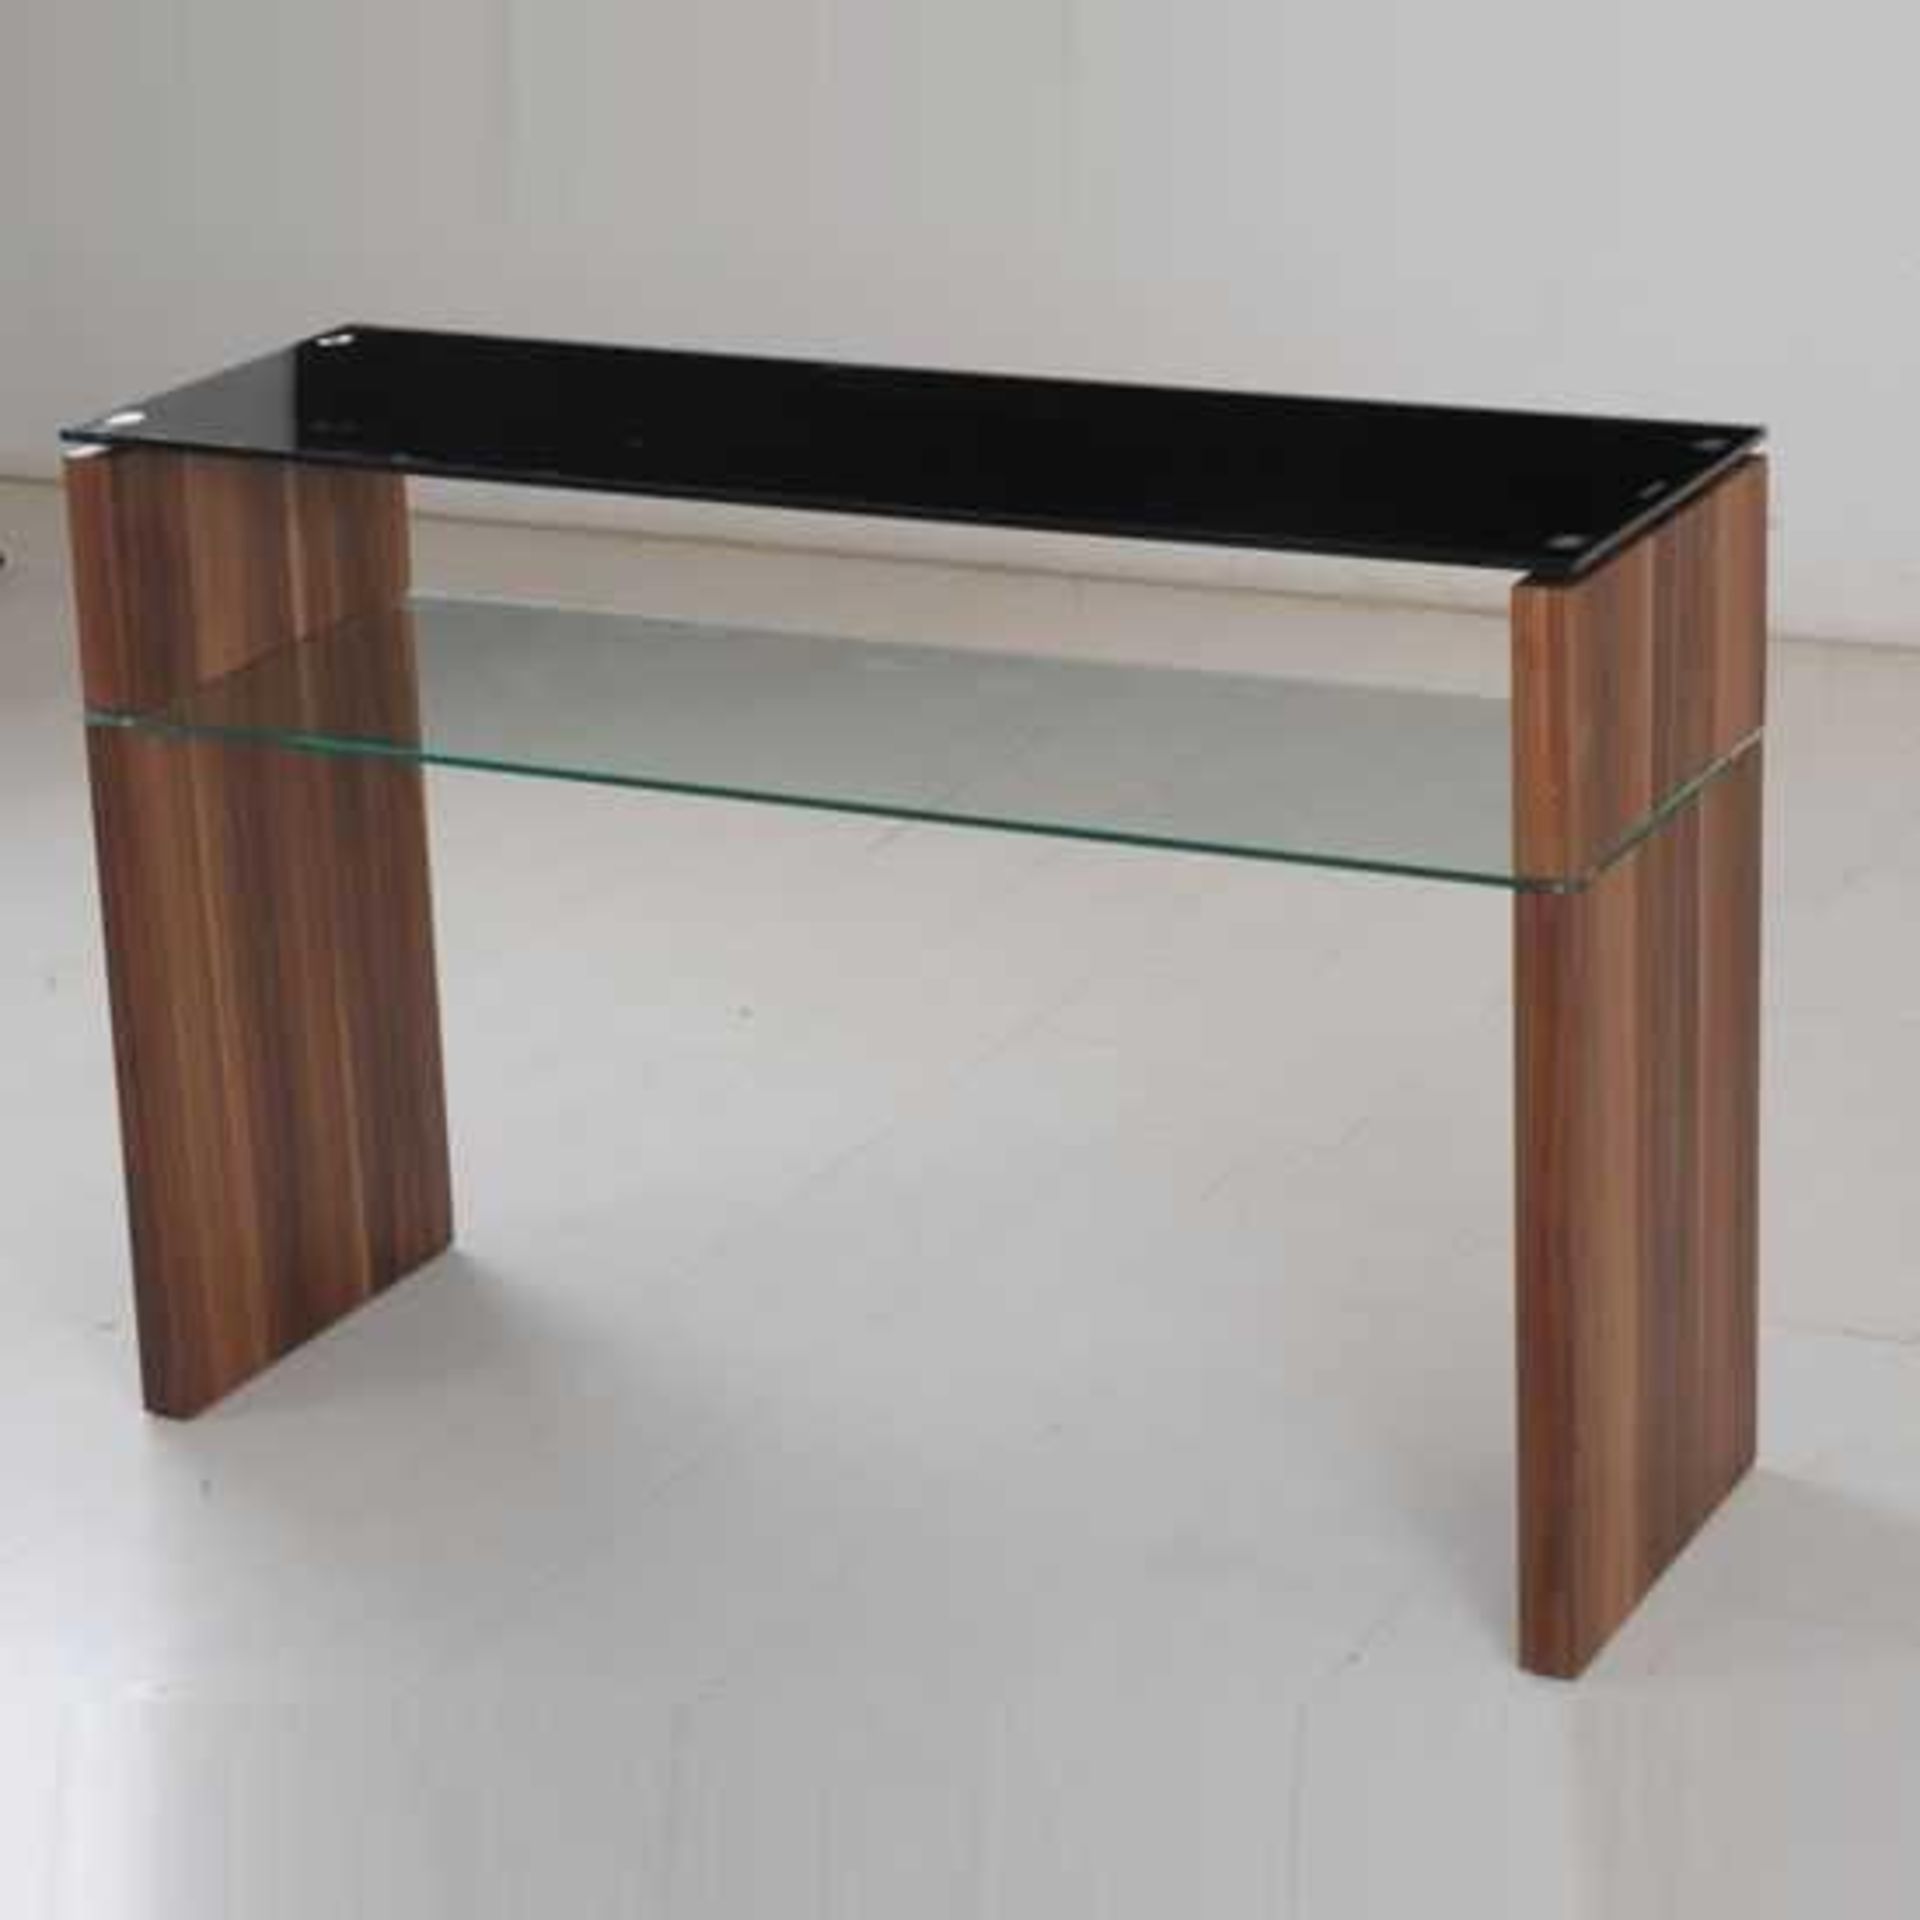 RRP £290 - Boxed 'Atlanta' Console Table In Walnut Finish With Black Glass Top